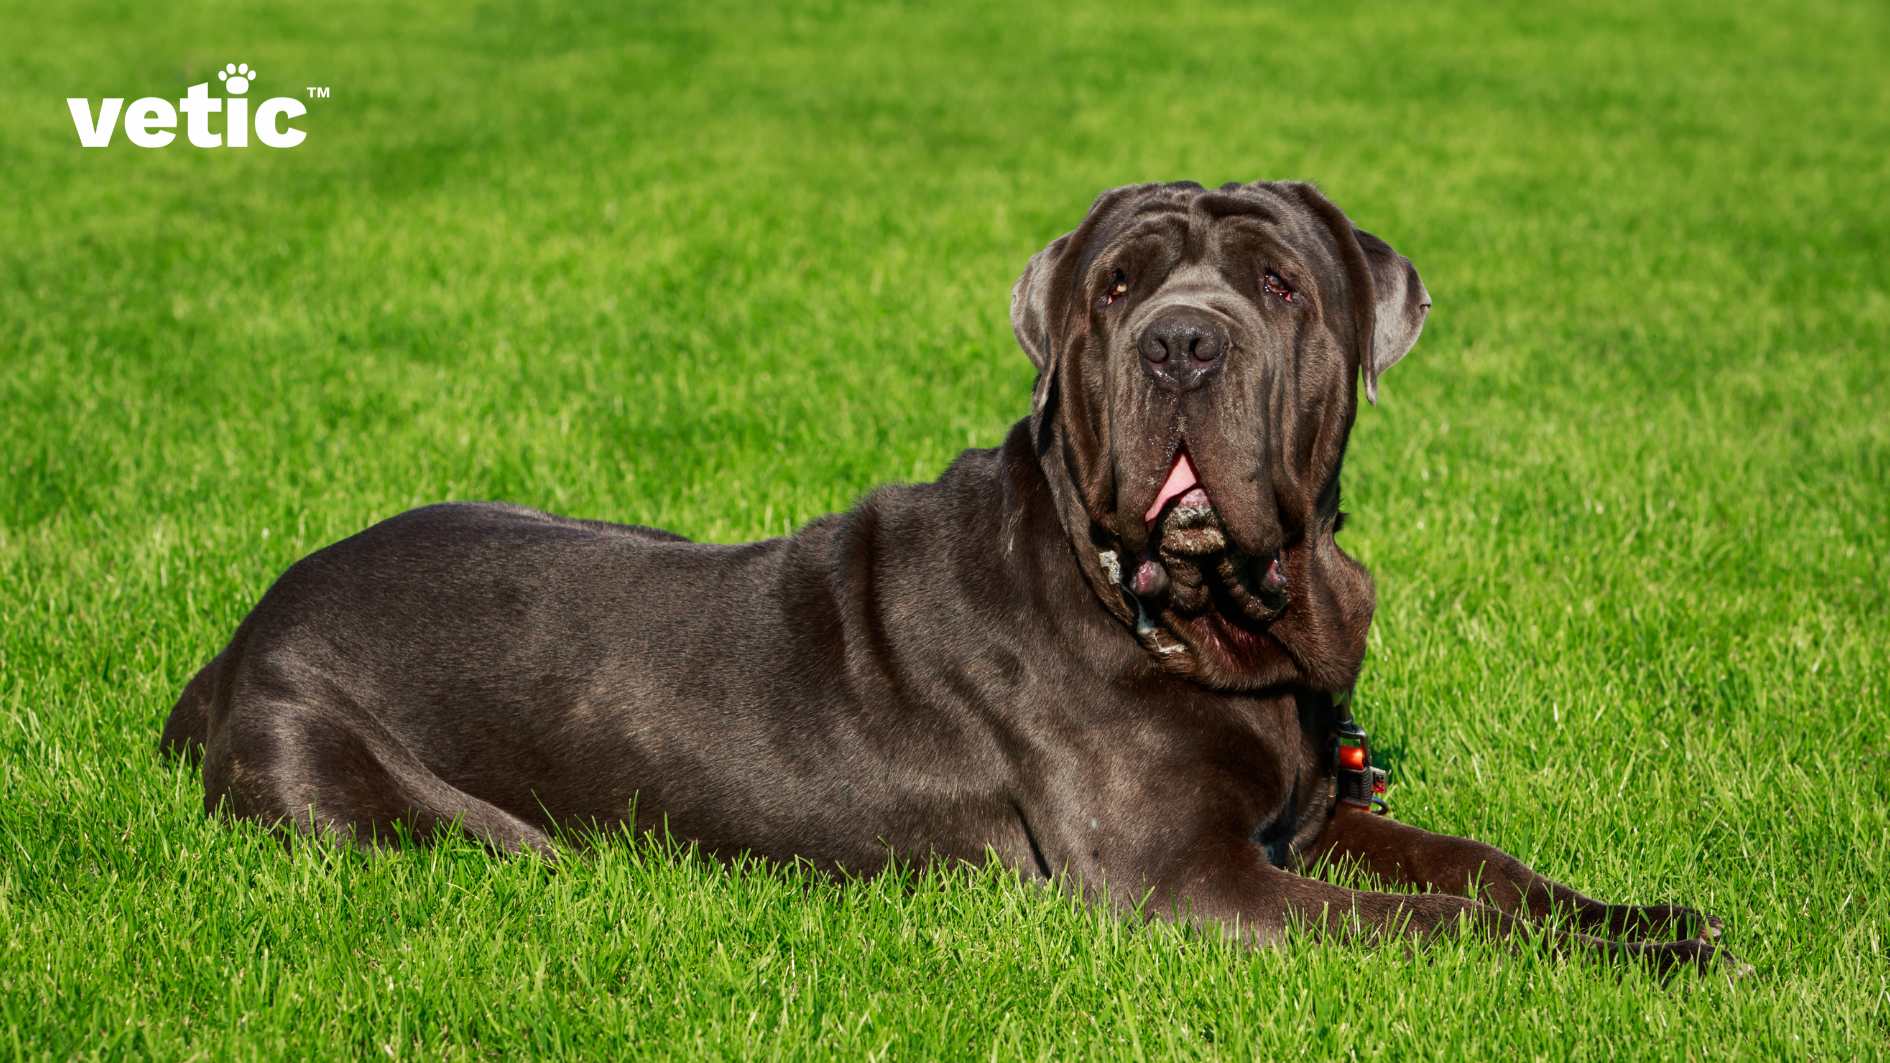 This photo shows a large, dark-colored Neapolitan Mastiff in India lying on a lush green lawn. The dog looks healthy and well-groomed, with a shiny coat and a muscular body. The dog has a unique face with wrinkles and folds, and it wears a collar with some tags. It is looking attentively at the camera, as if posing for the photo. The photo also has the word “vetic” in the top left corner, which could be the name of a company or a product related to the dog or the photo. The photo has a vibrant and contrasting quality, with the green lawn and the blue sky creating a beautiful backdrop for the dog. The photo captures the dog’s beauty and personality, as well as the pleasant environment of the outdoor setting.